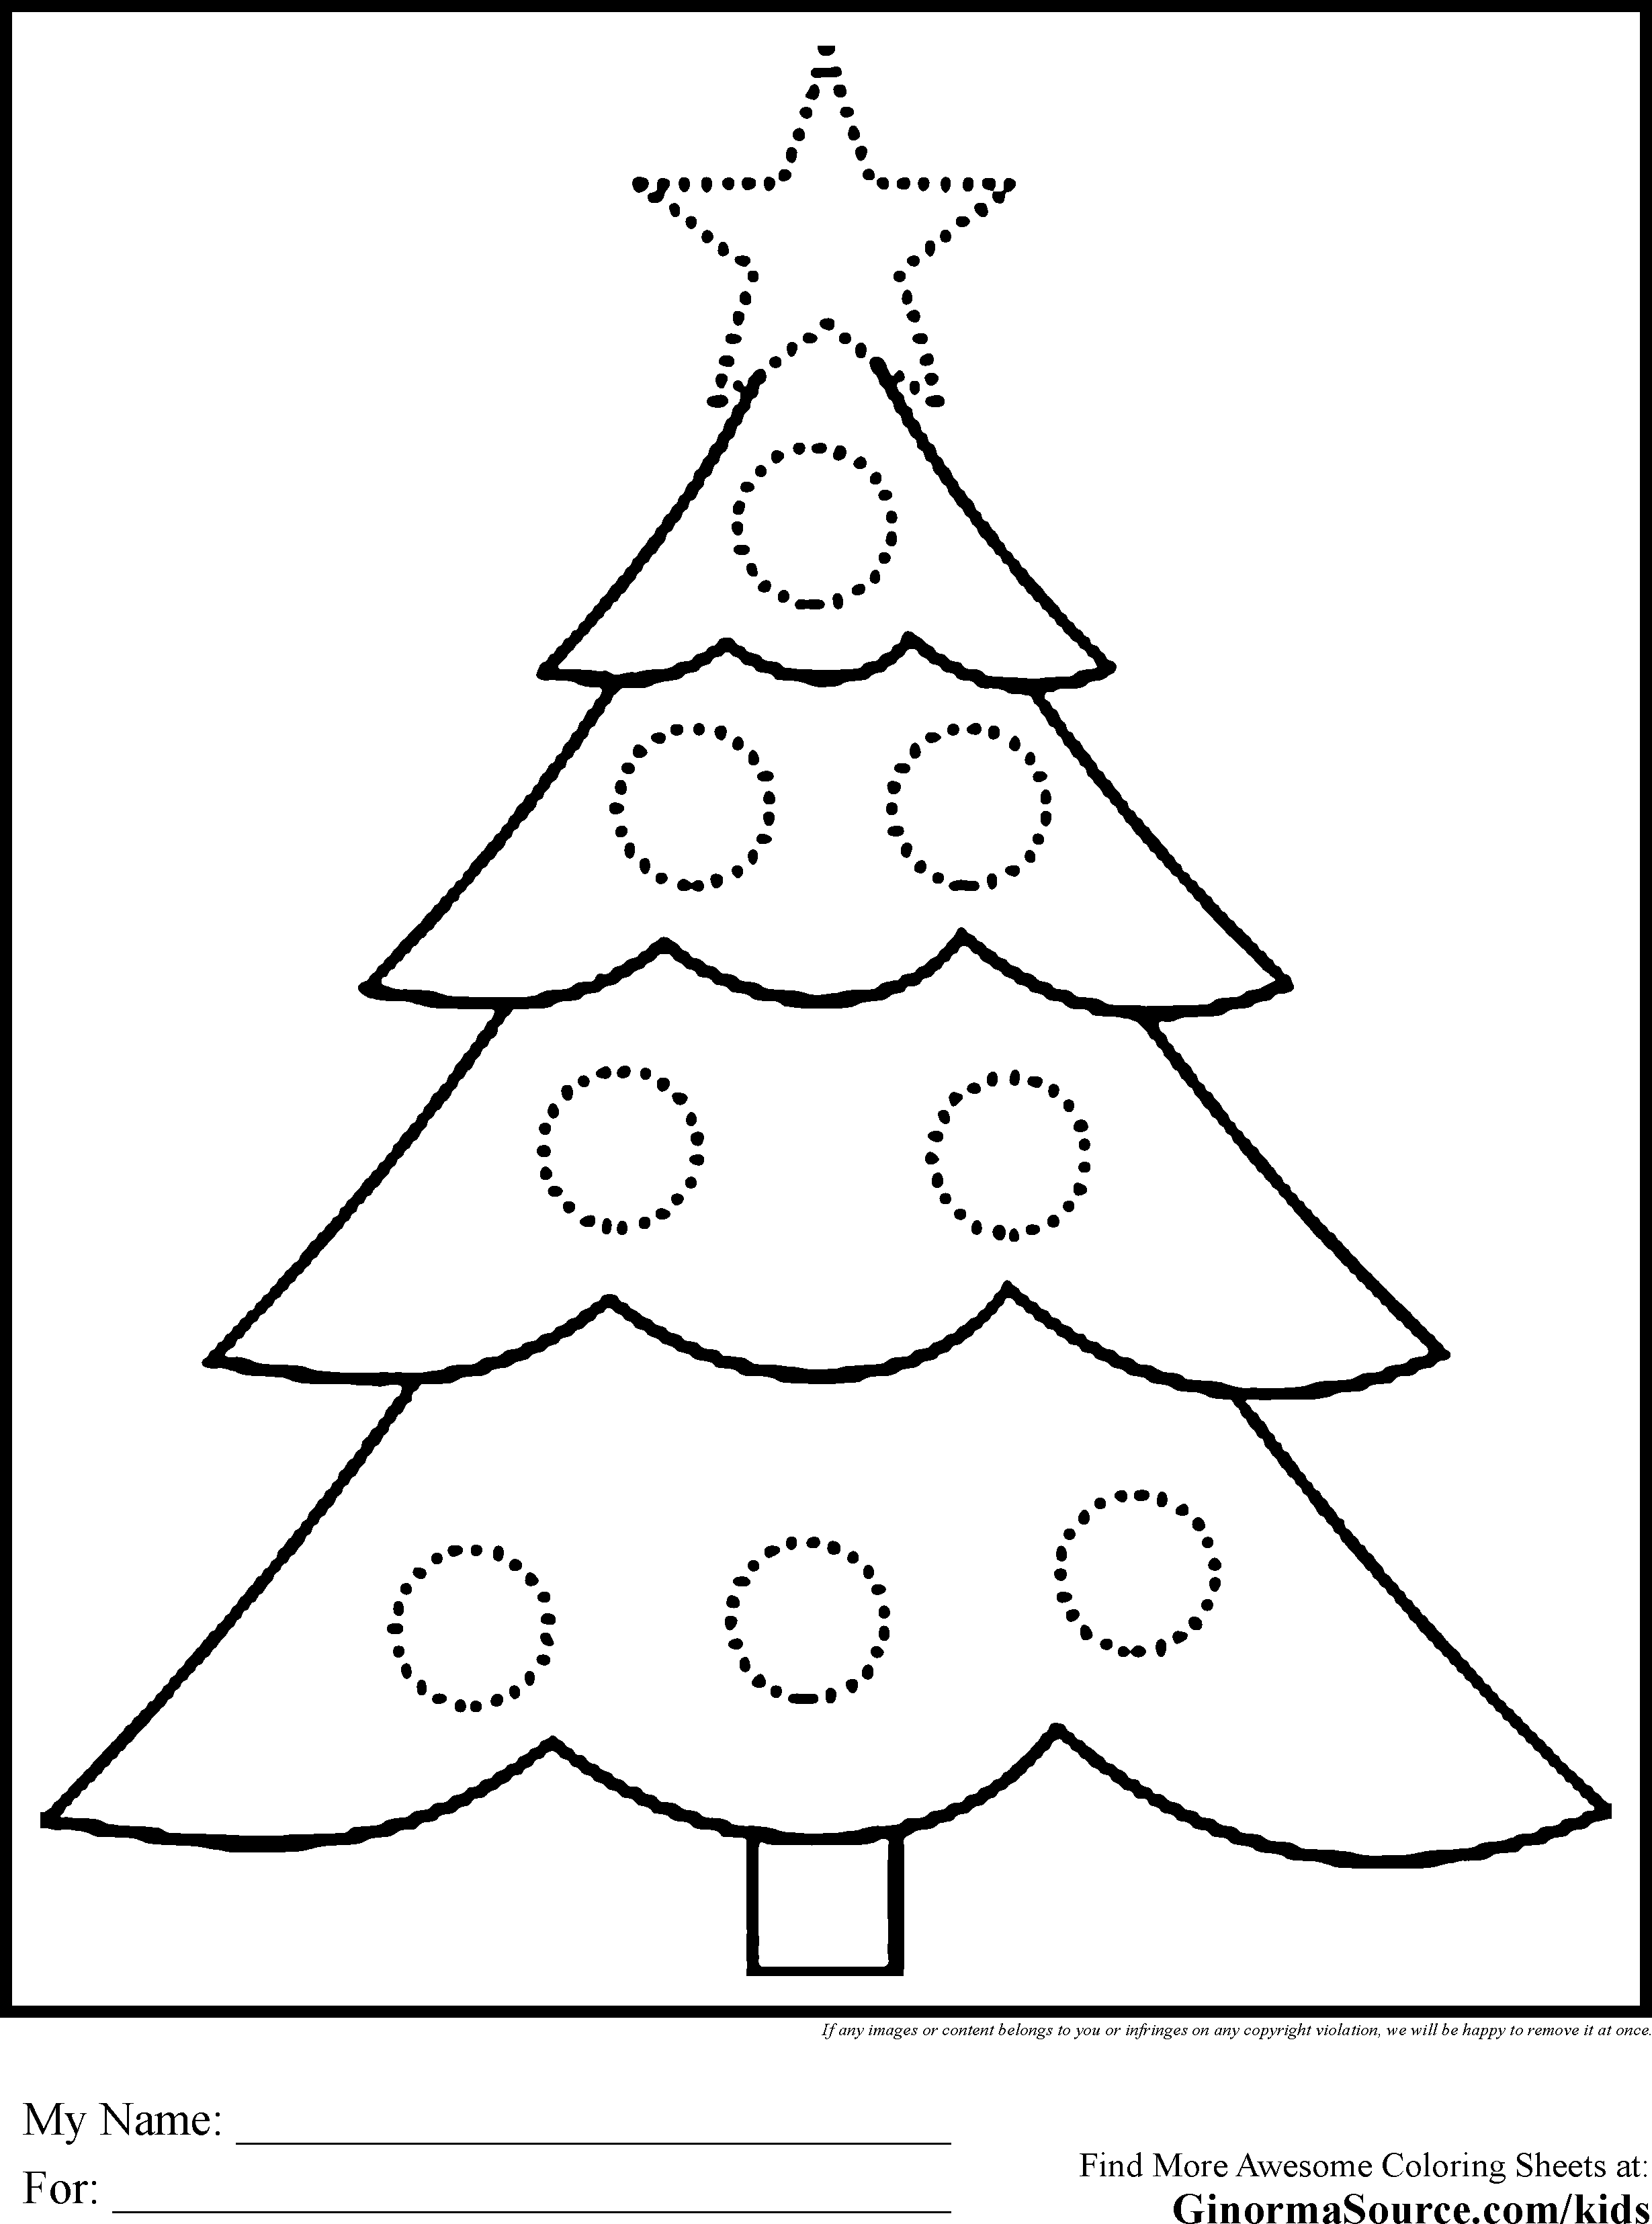 Christmas Tree Color Coordination Christmas tree coloring page free home